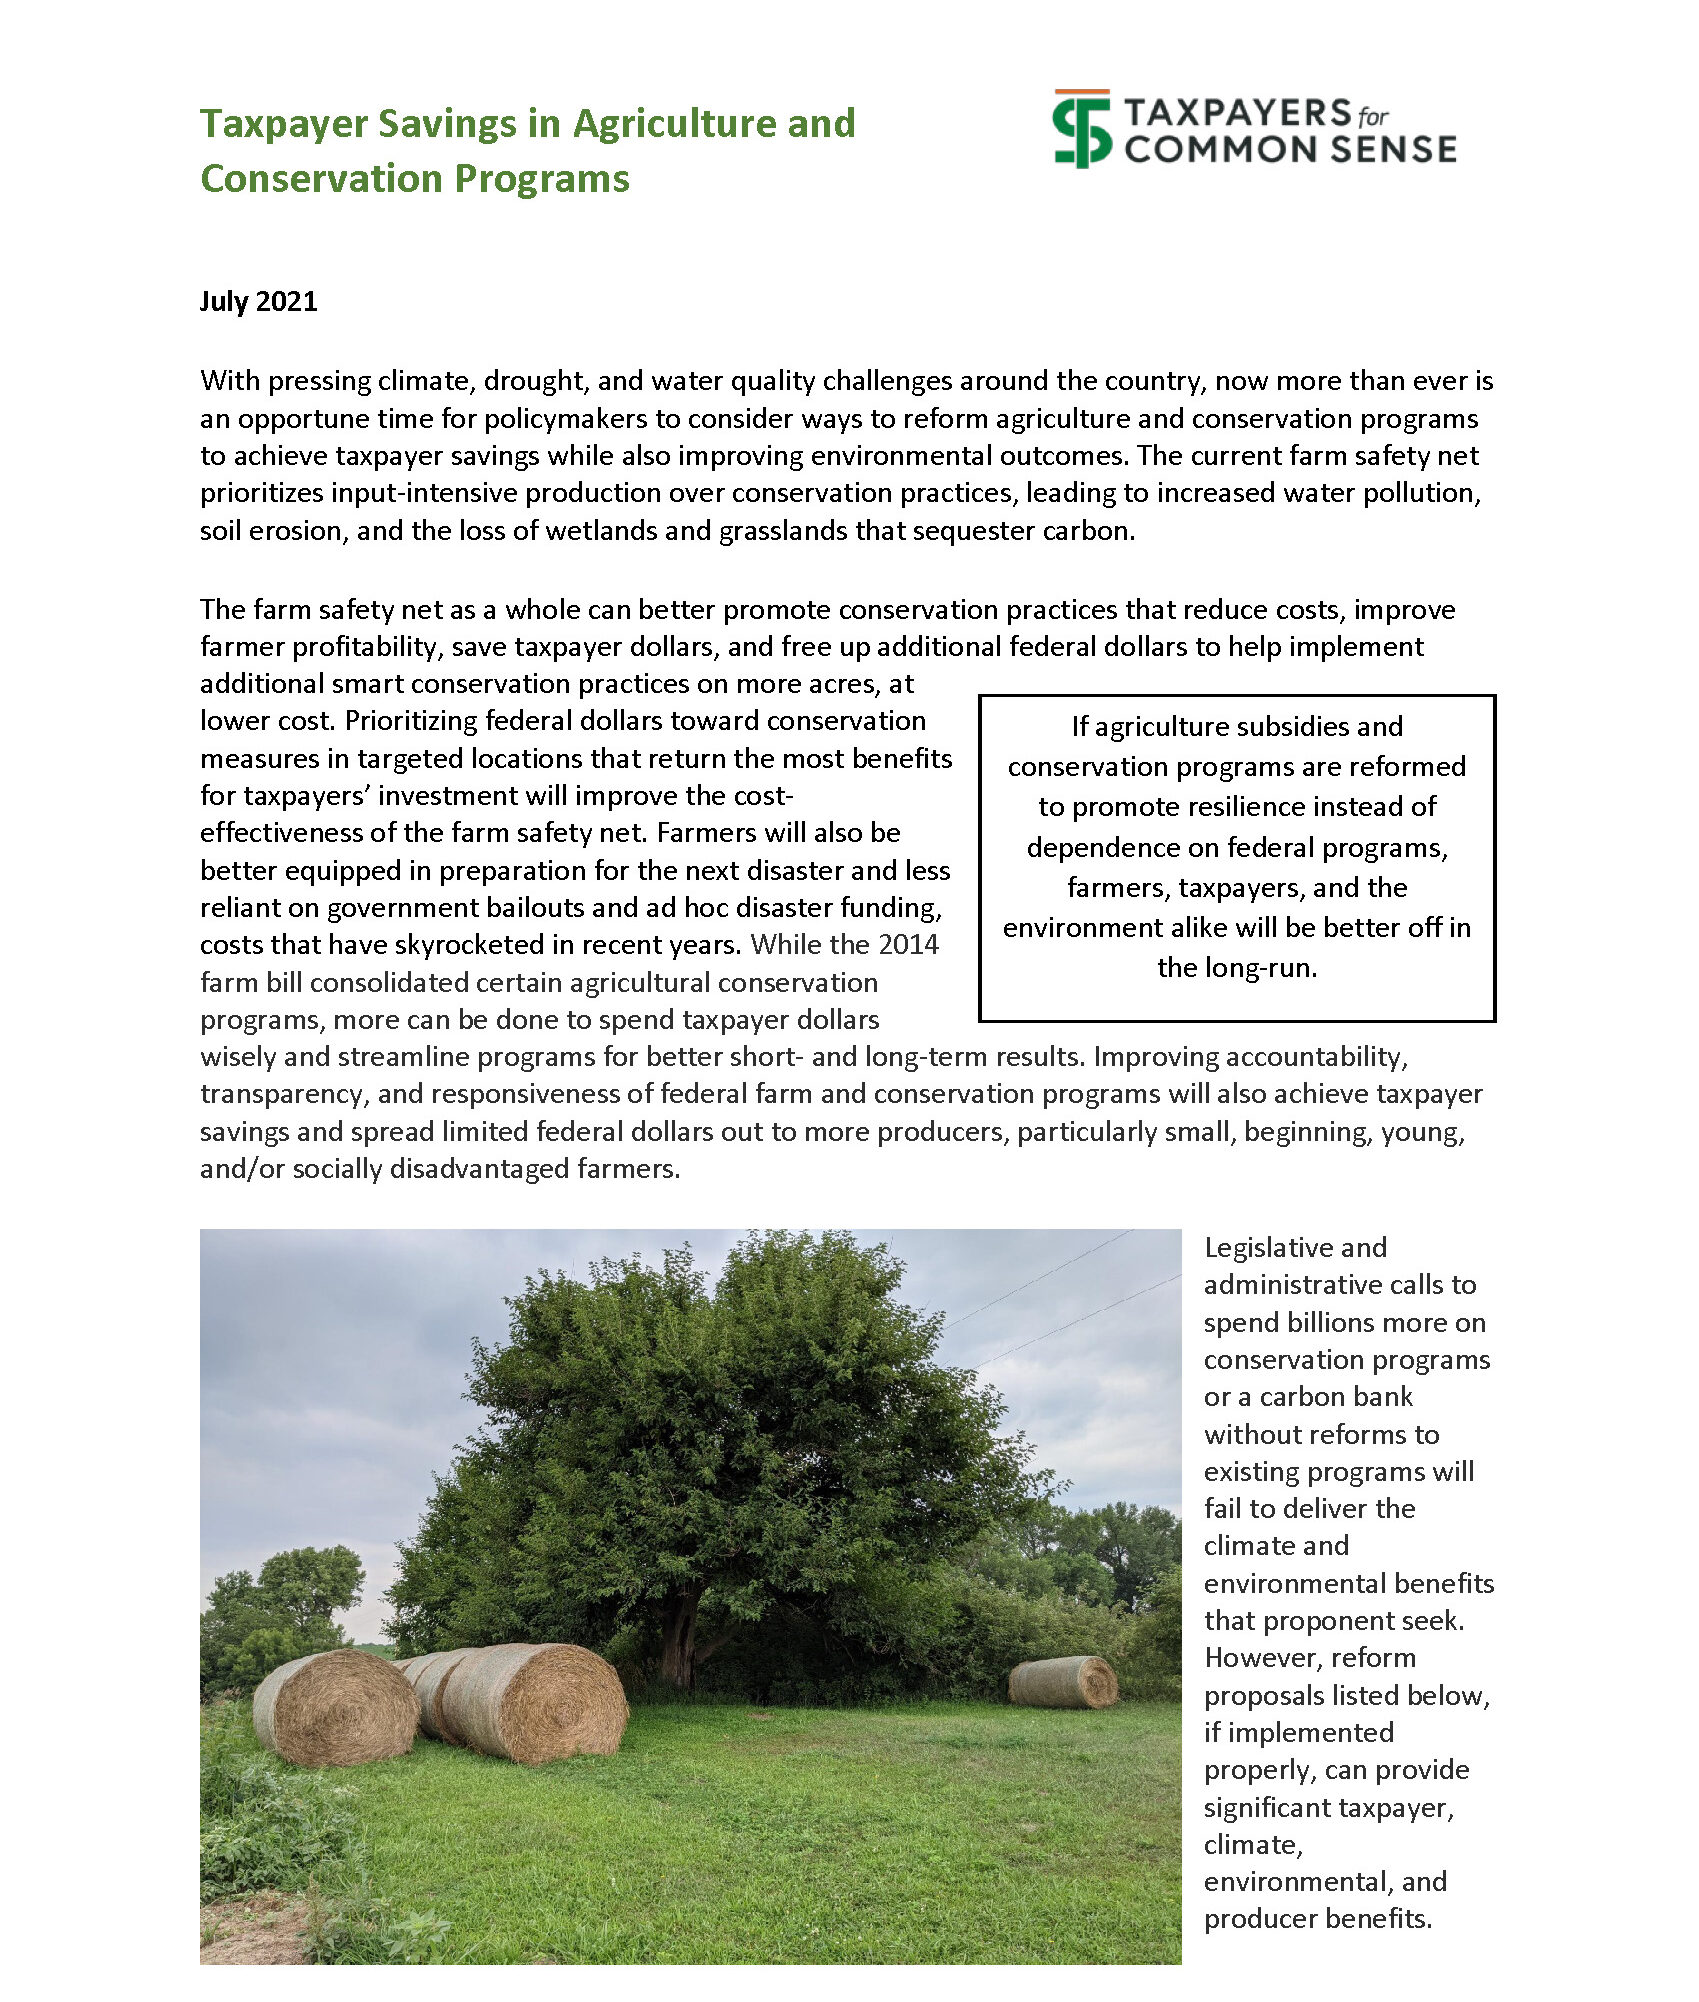 Cover of Taxpayer Savings in Agriculture and Conservation Programs Fact Sheet